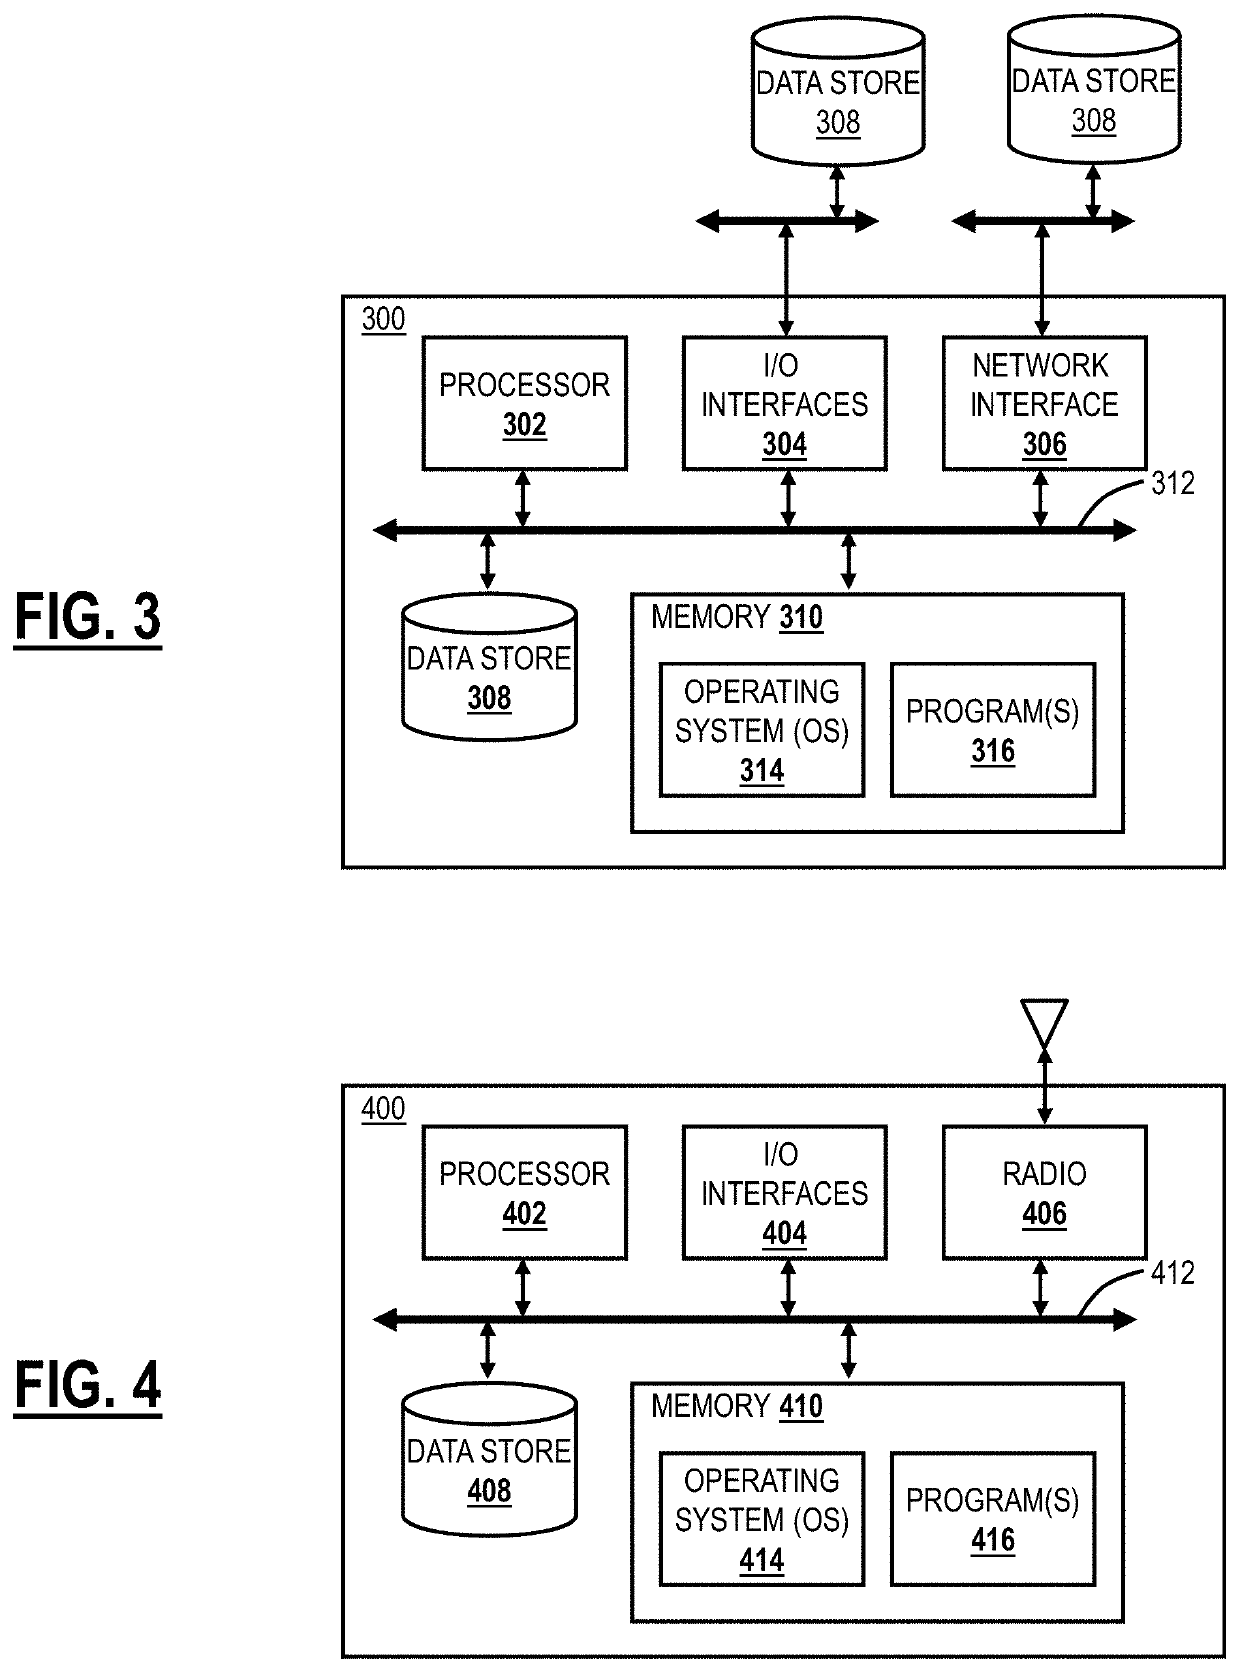 Systems and methods for alerting administrators of a monitored digital user experience